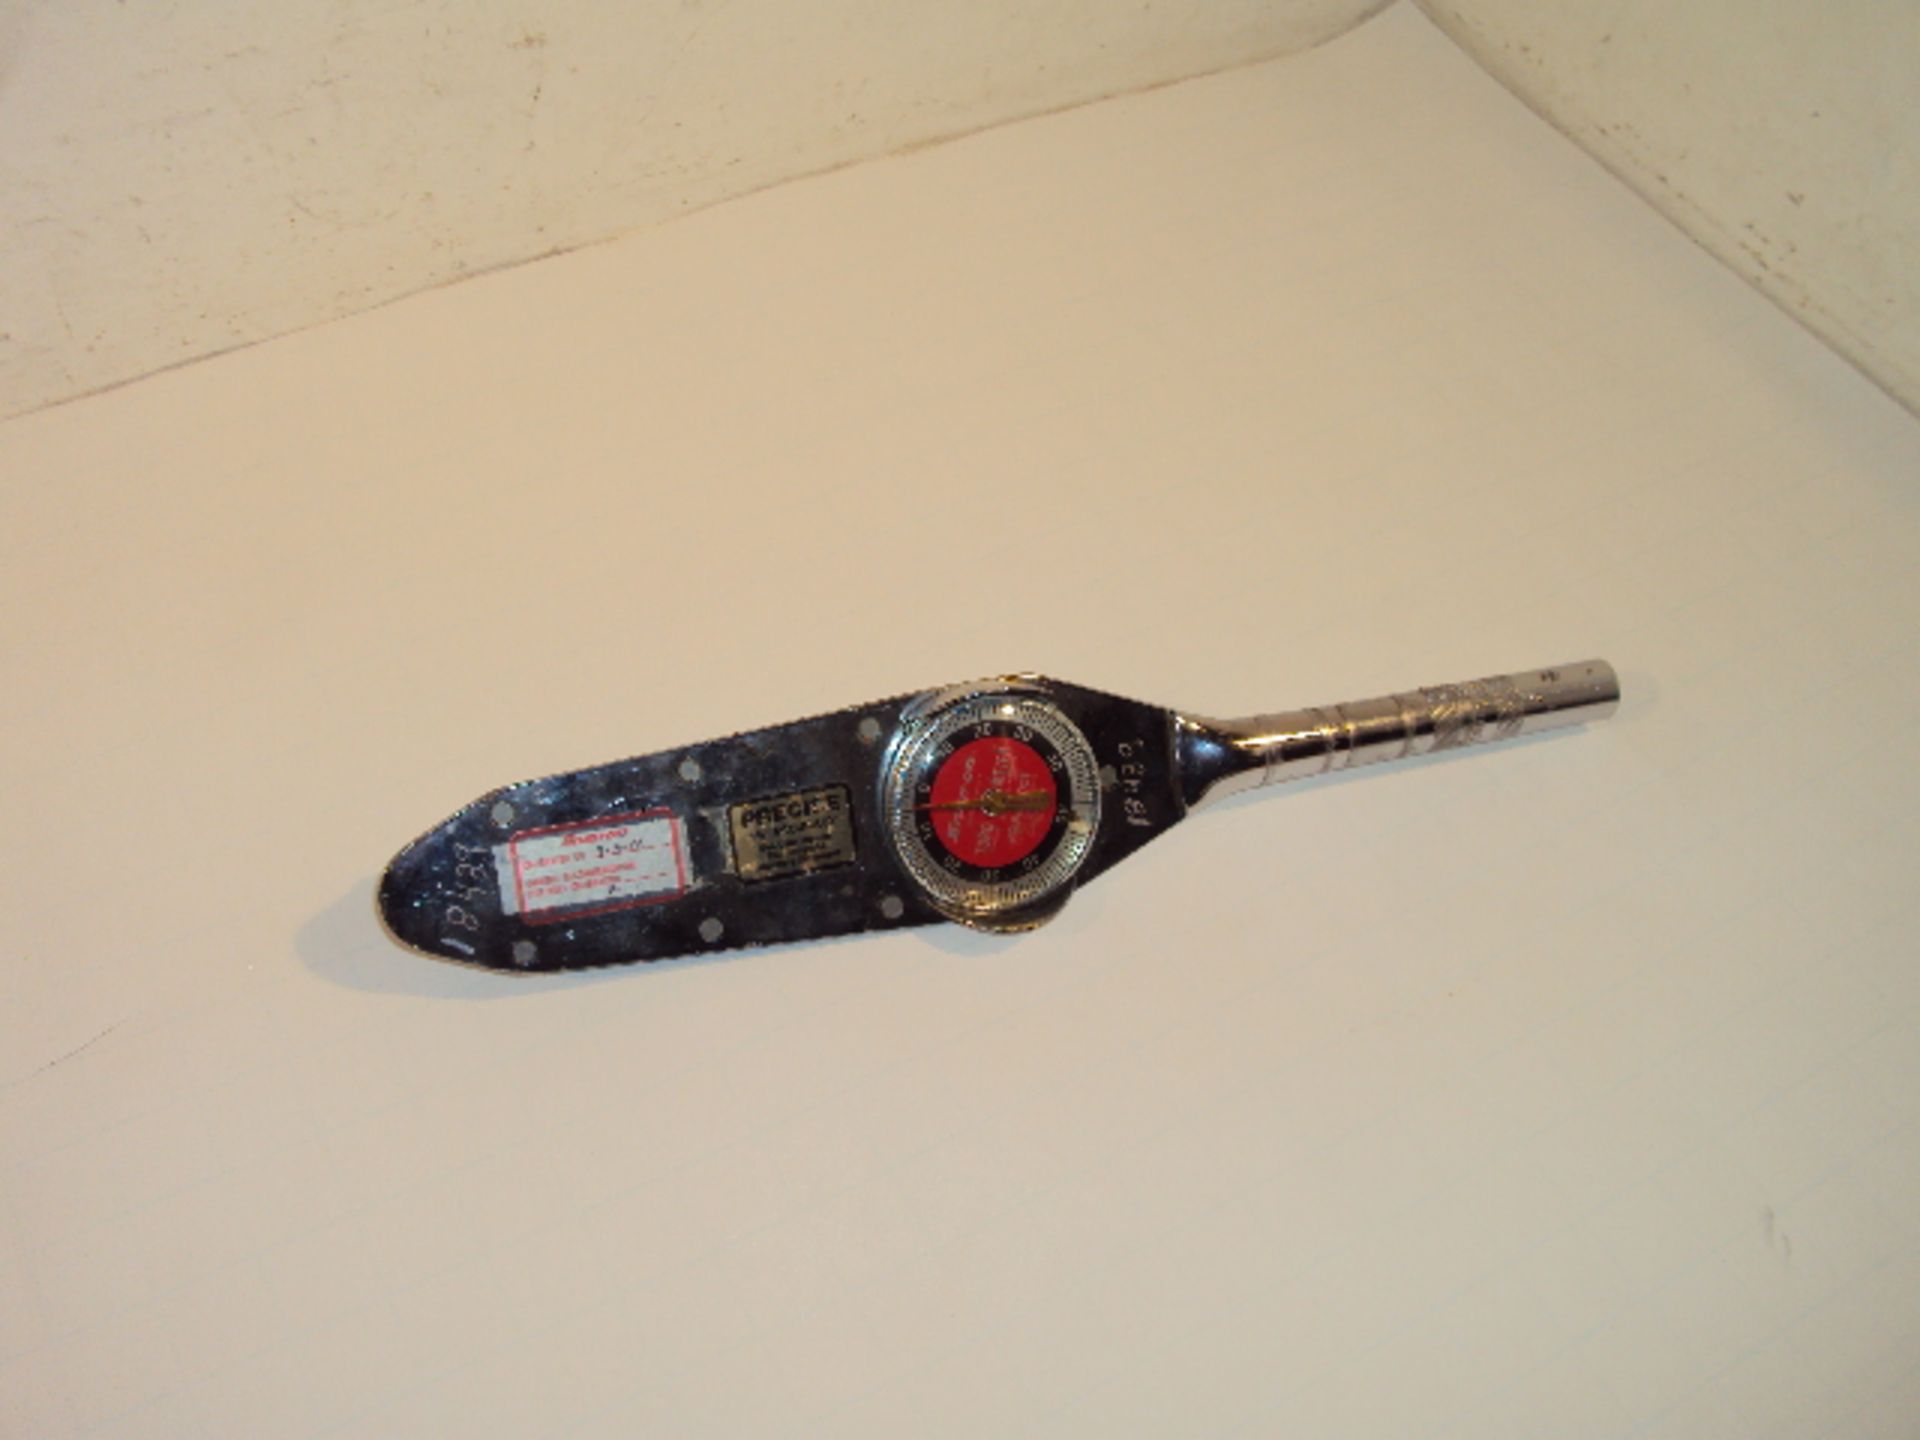 Snap-On TEP51F 0-50 Foot Pound 1/2" Drive Torque Wrench